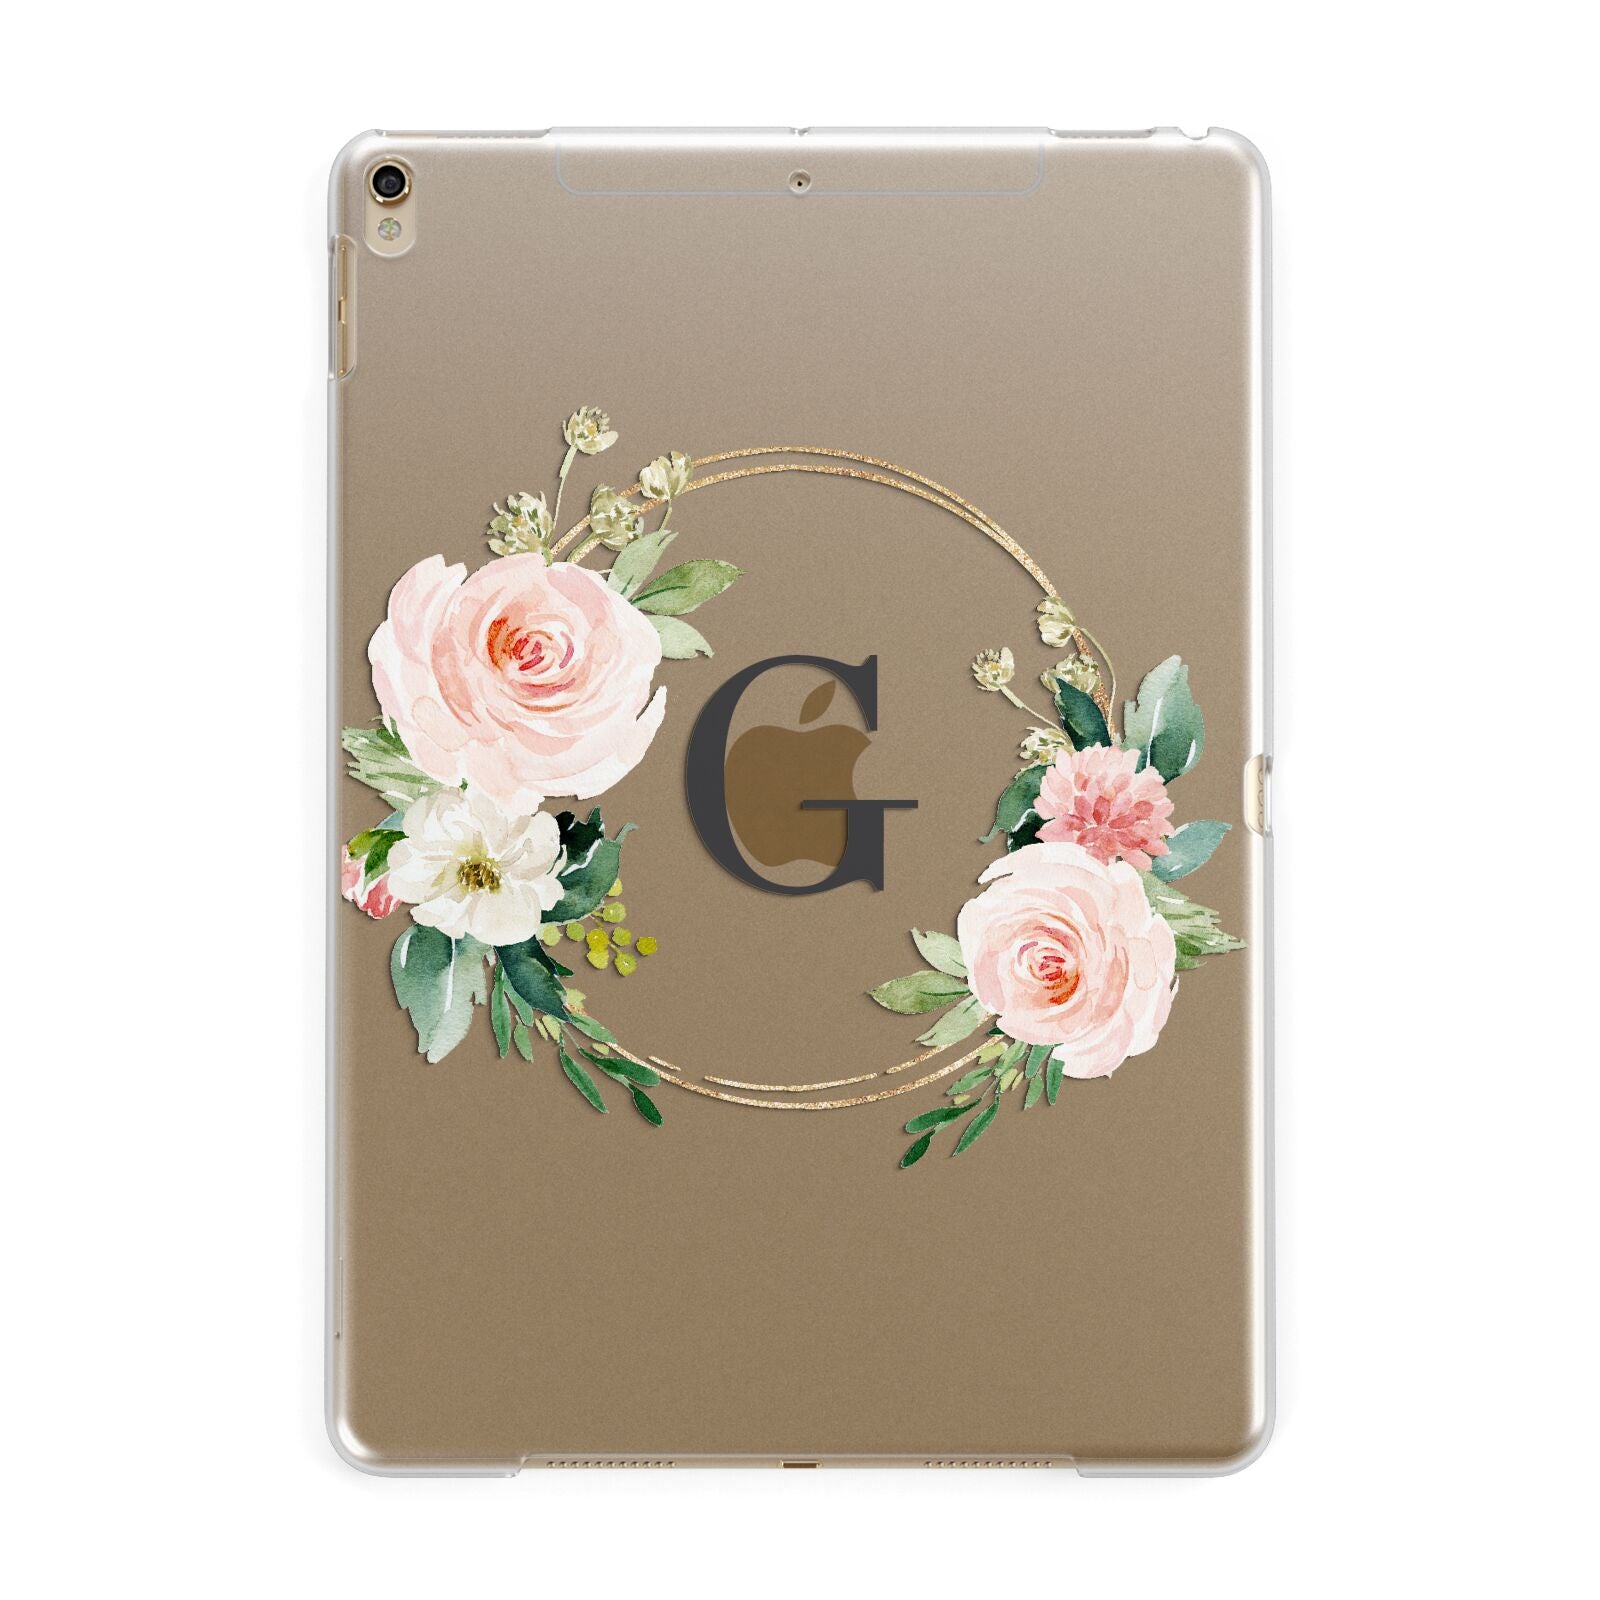 Personalised Blush Floral Wreath Apple iPad Gold Case